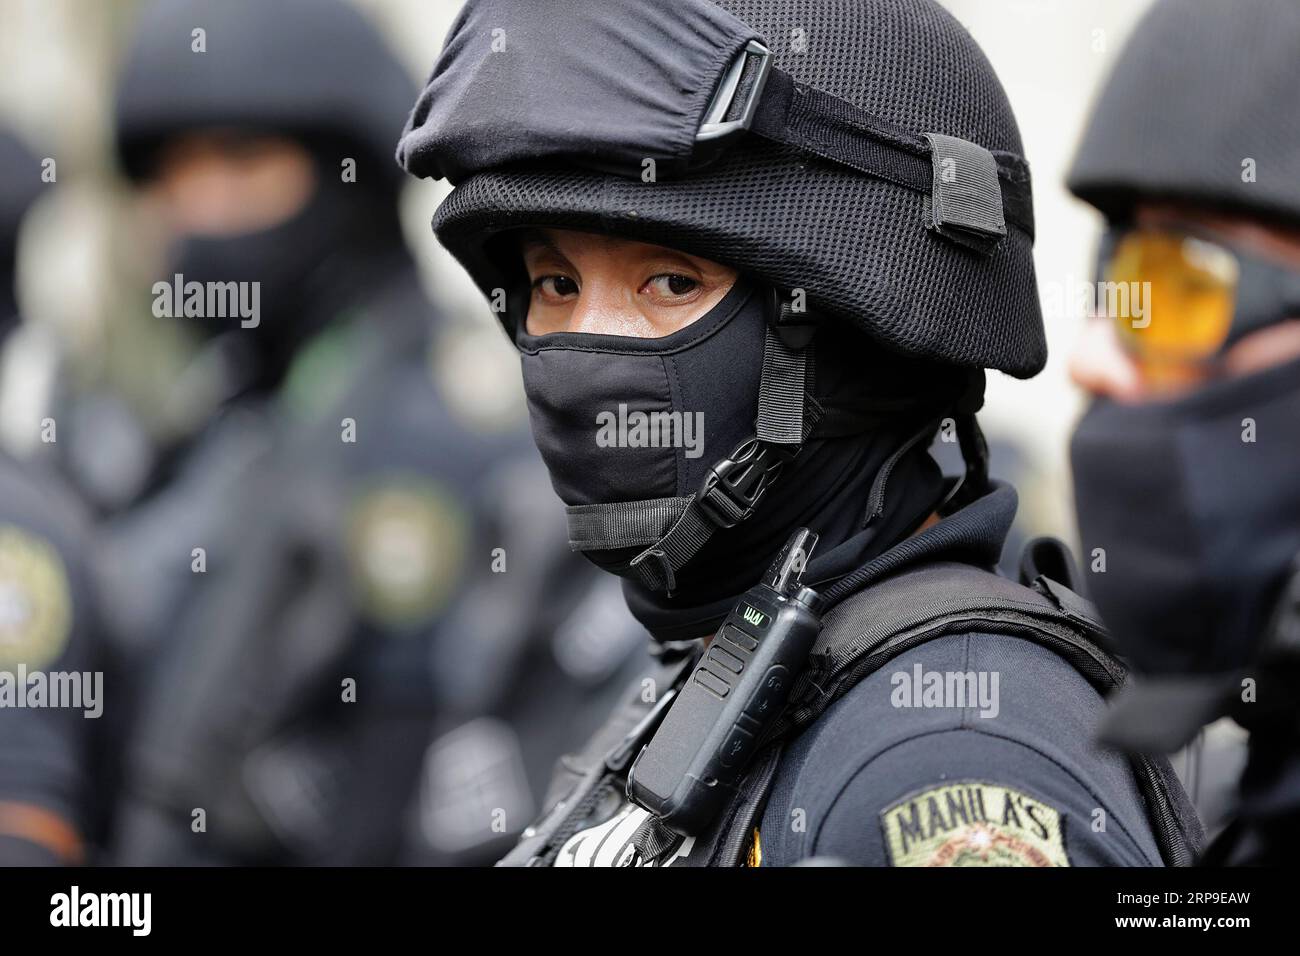 (190404) -- MANILA, April 4, 2019 -- A member of the Philippine National Police s Special Weapons and Tactics (PNP-SWAT) participates in an anti-terrorism drill in Manila, the Philippines, April 4, 2019. Philippine security forces have tightened security after Wednesday s blast in southern Philippine Isulan town in Sultan Kudarat province that wounded 18 people at least, a military general said on Thursday. ) PHILIPPINES-MANILA-ANTI-TERRORISM DRILL ROUELLExUMALI PUBLICATIONxNOTxINxCHN Stock Photo